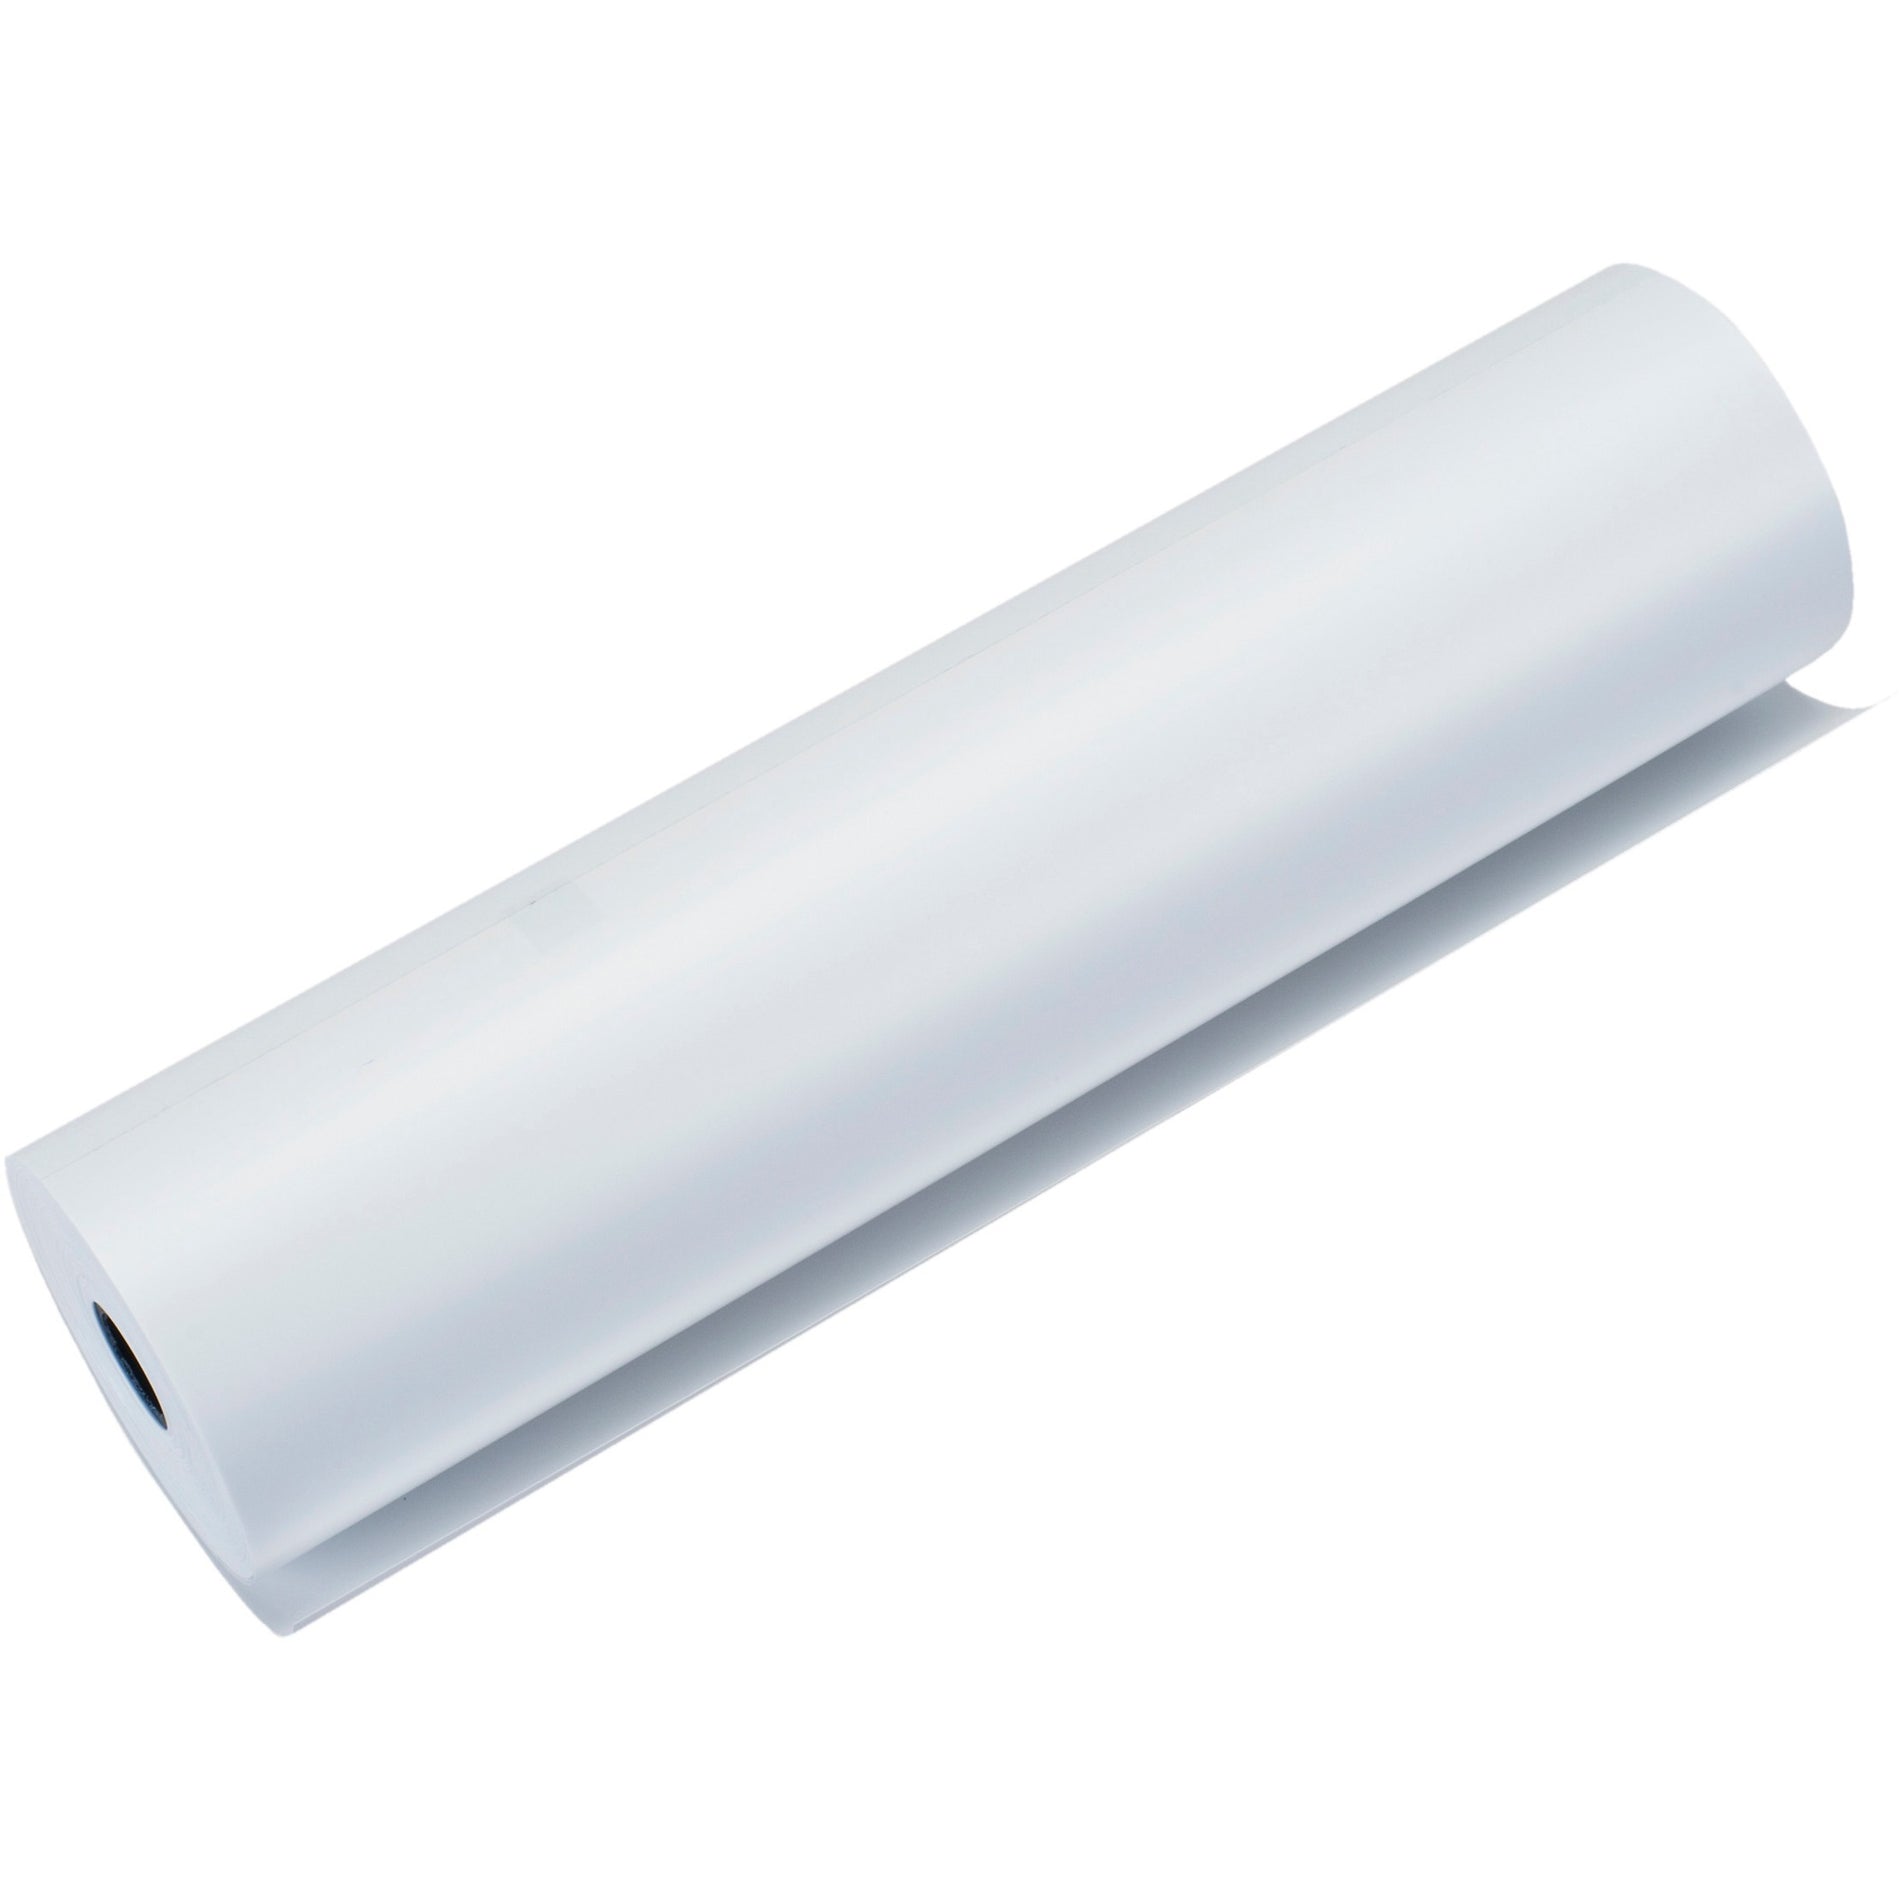 Brother LB3788 Thermal Paper, 6 / Roll - Printable Paper for High-Quality Printing